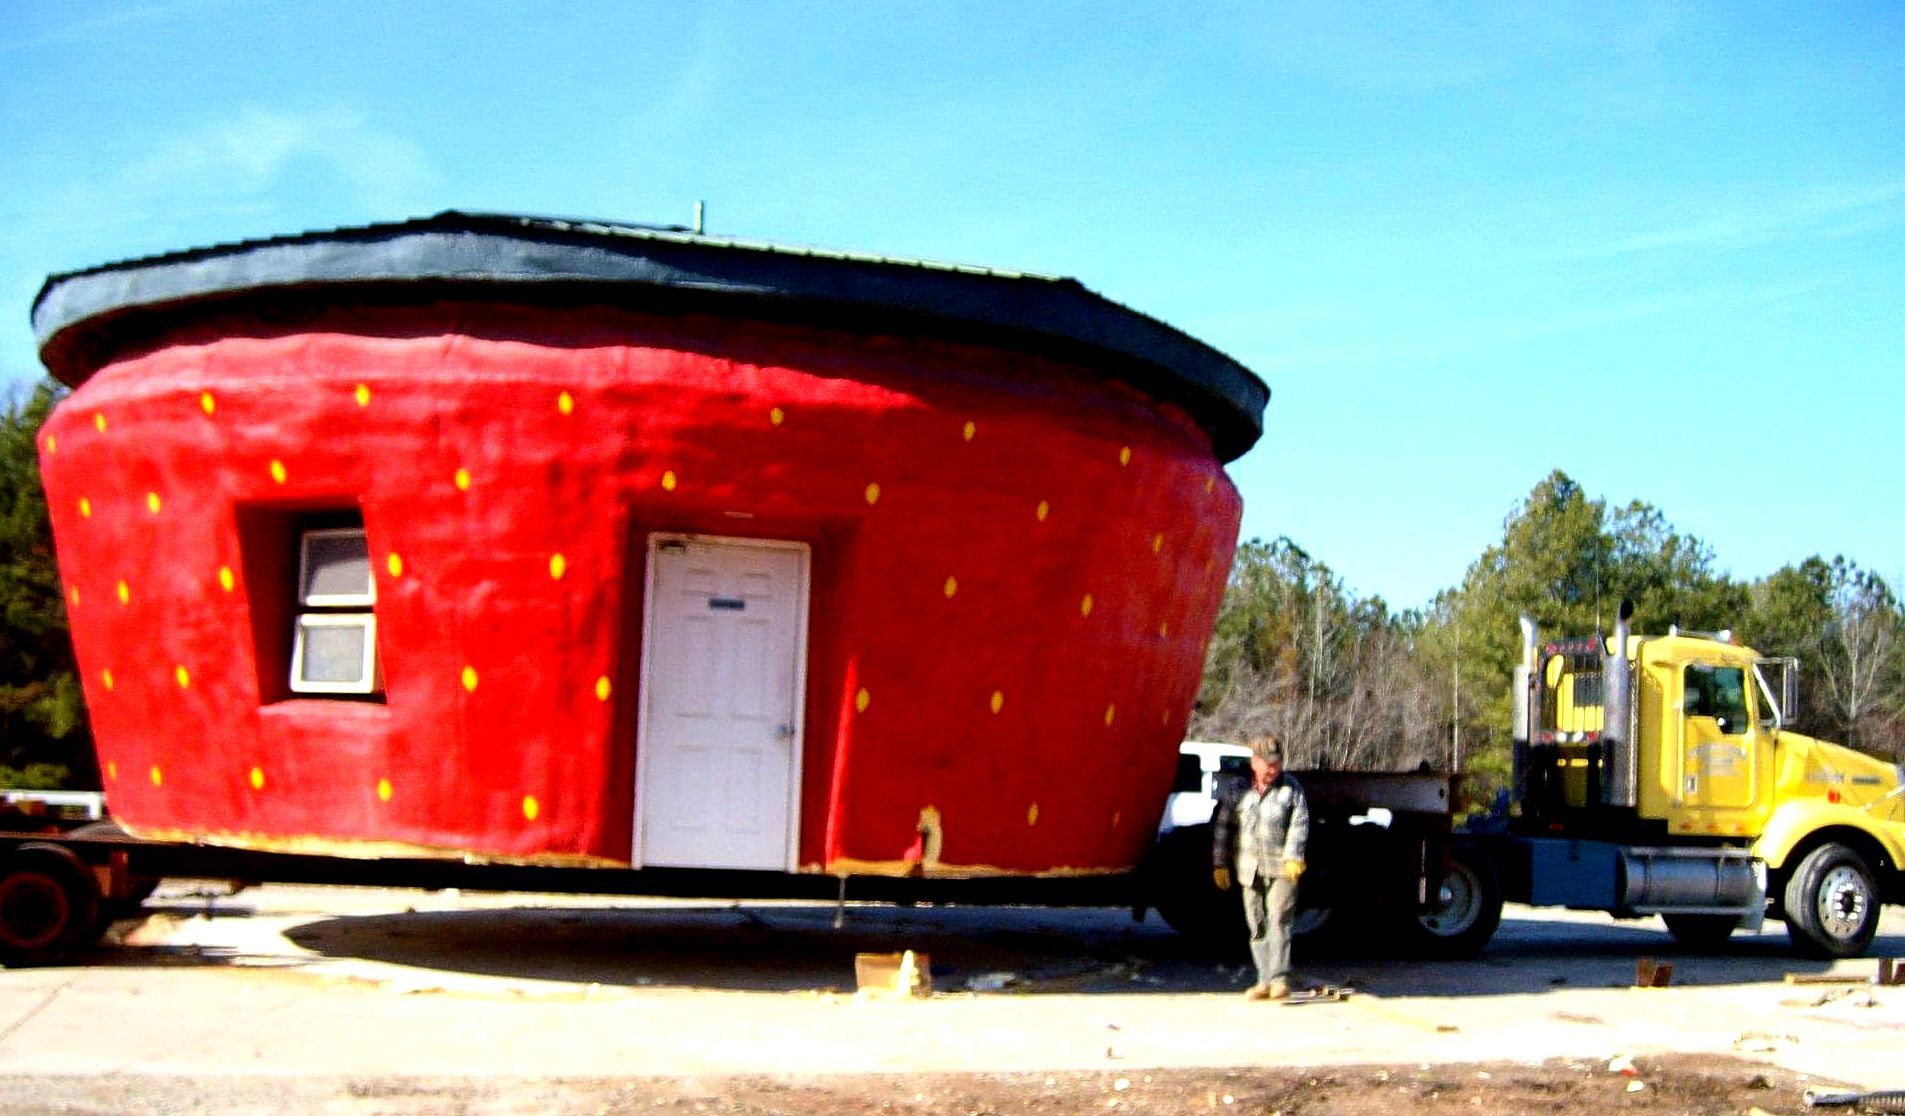 World's Largest Strawberry-shaped Building, world record in Ellerbe, North Carolina
